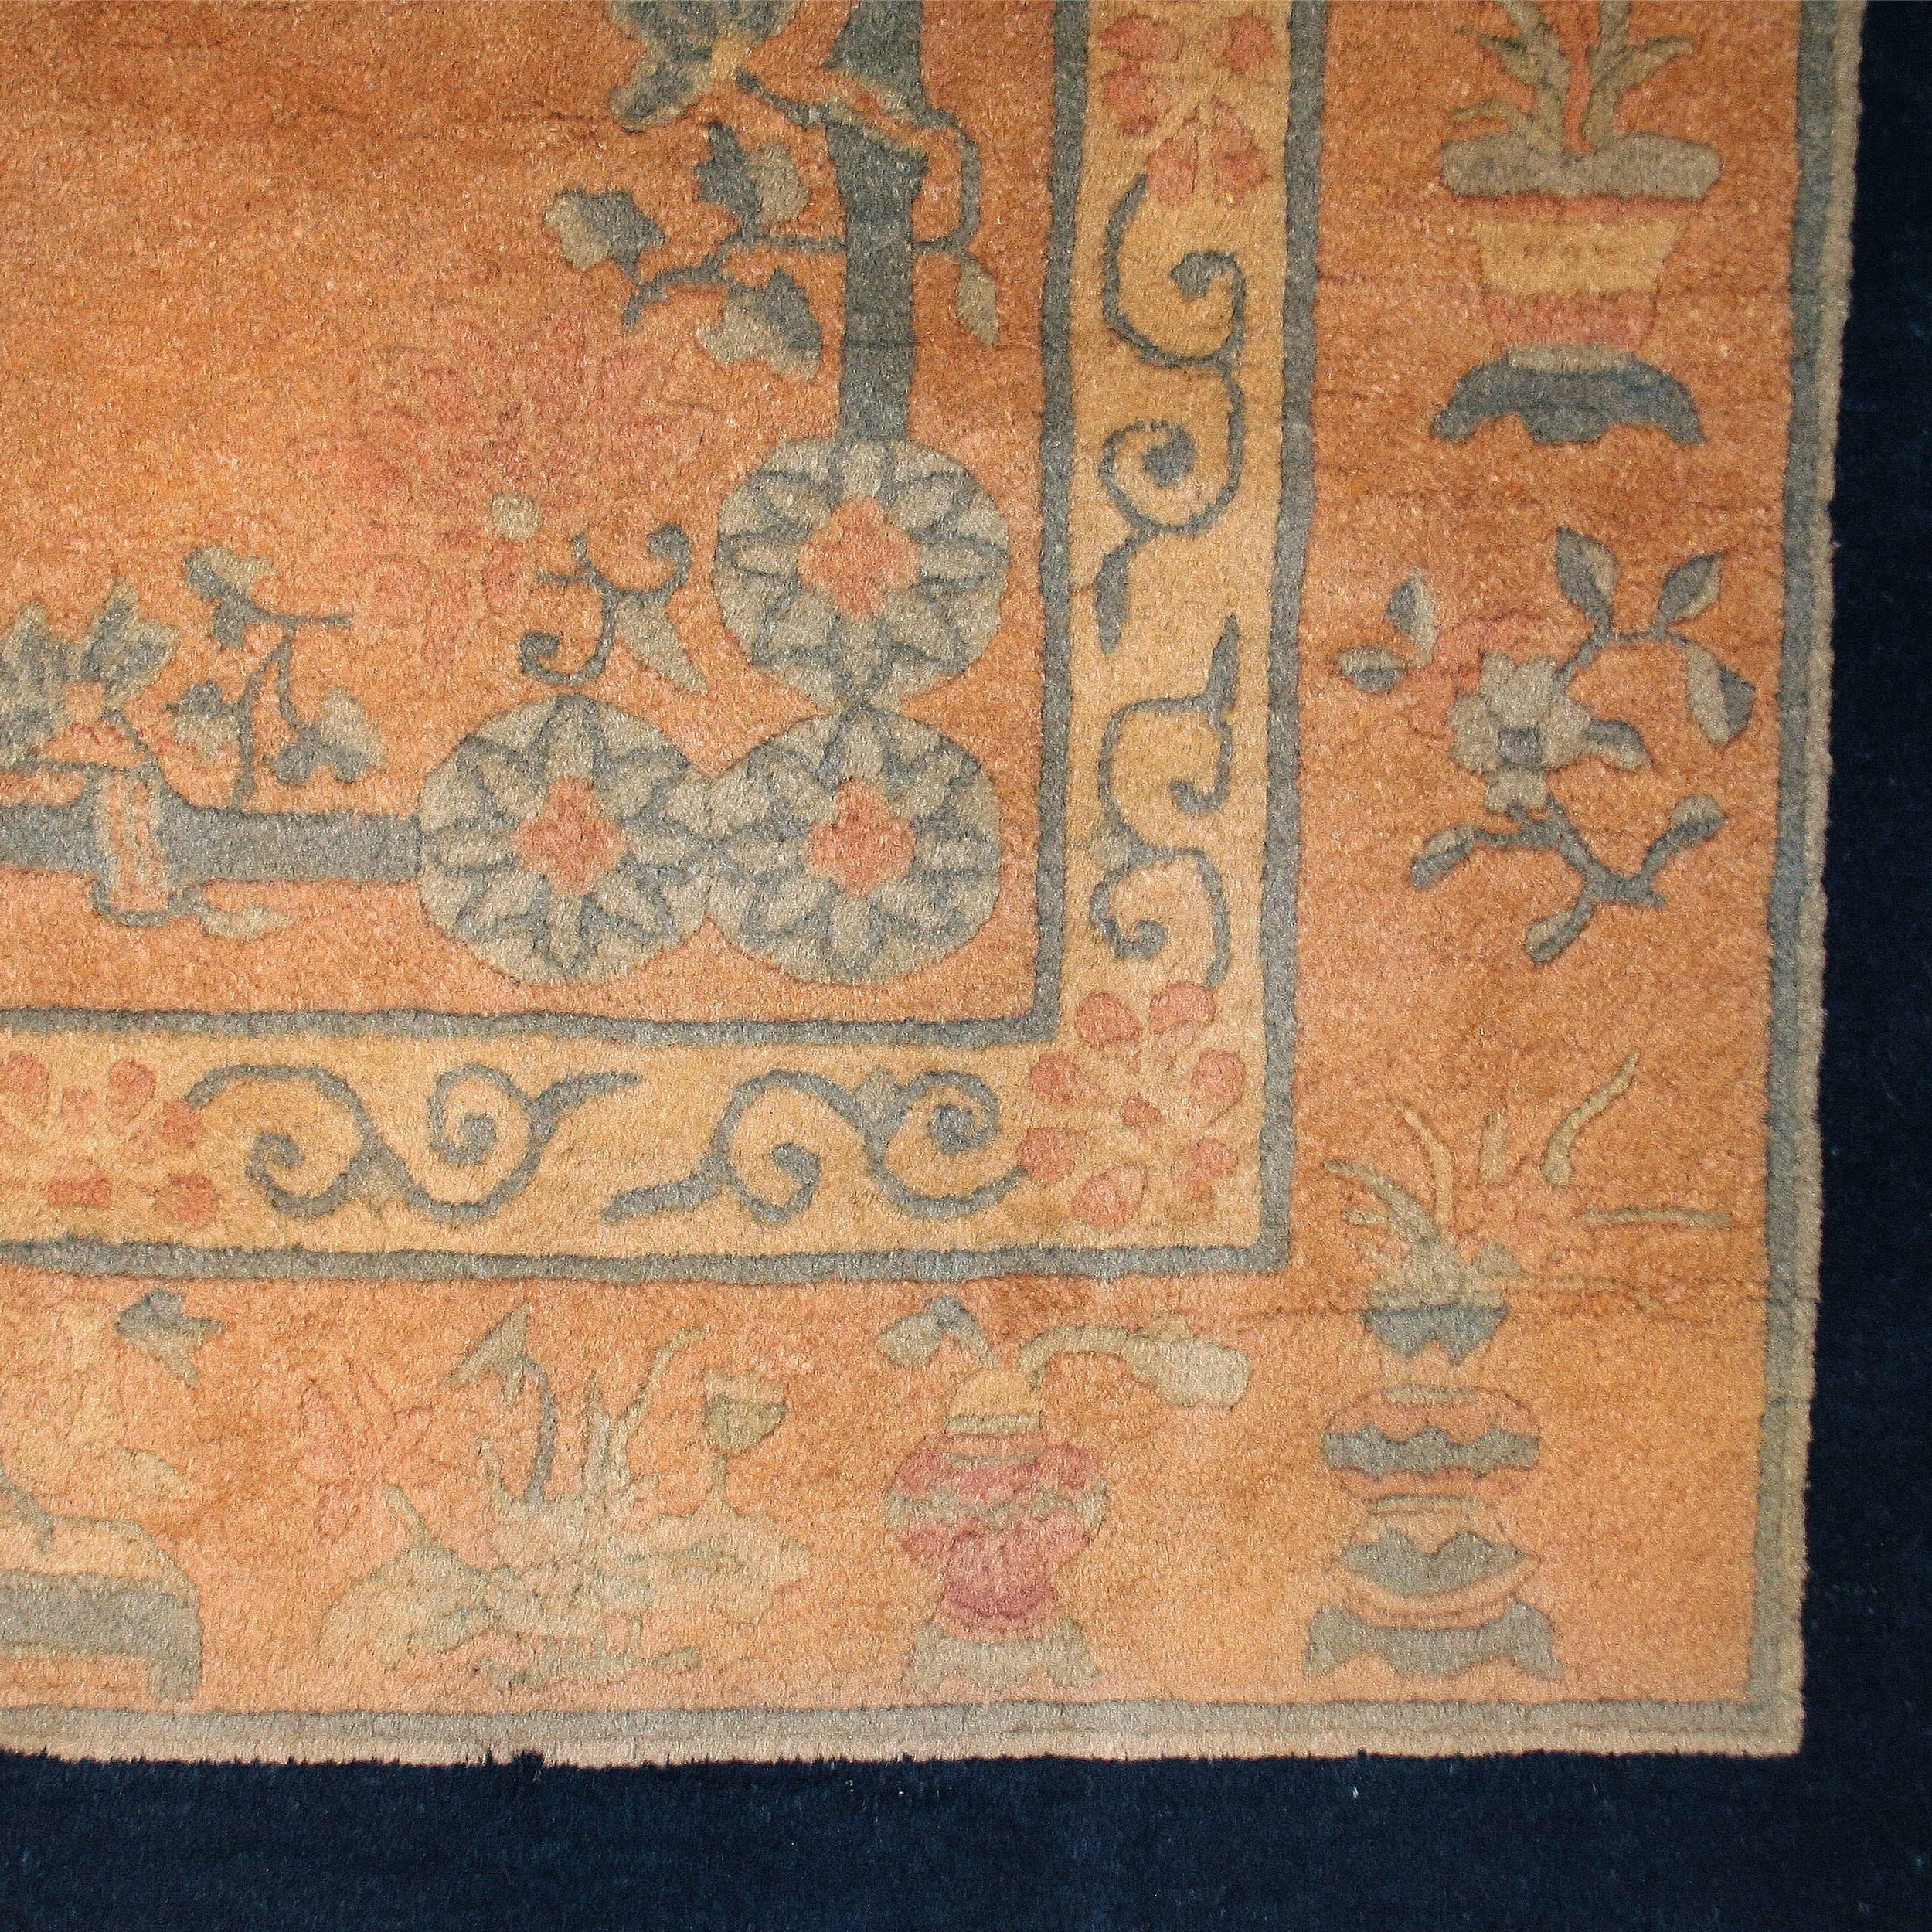 Carpets such as this one were woven in China during the Art Deco period in order to satisfy the demand in the West for decorative rugs designed in the Art Deco taste. Here the soft apricot open field is embellished with a central motif consisting of